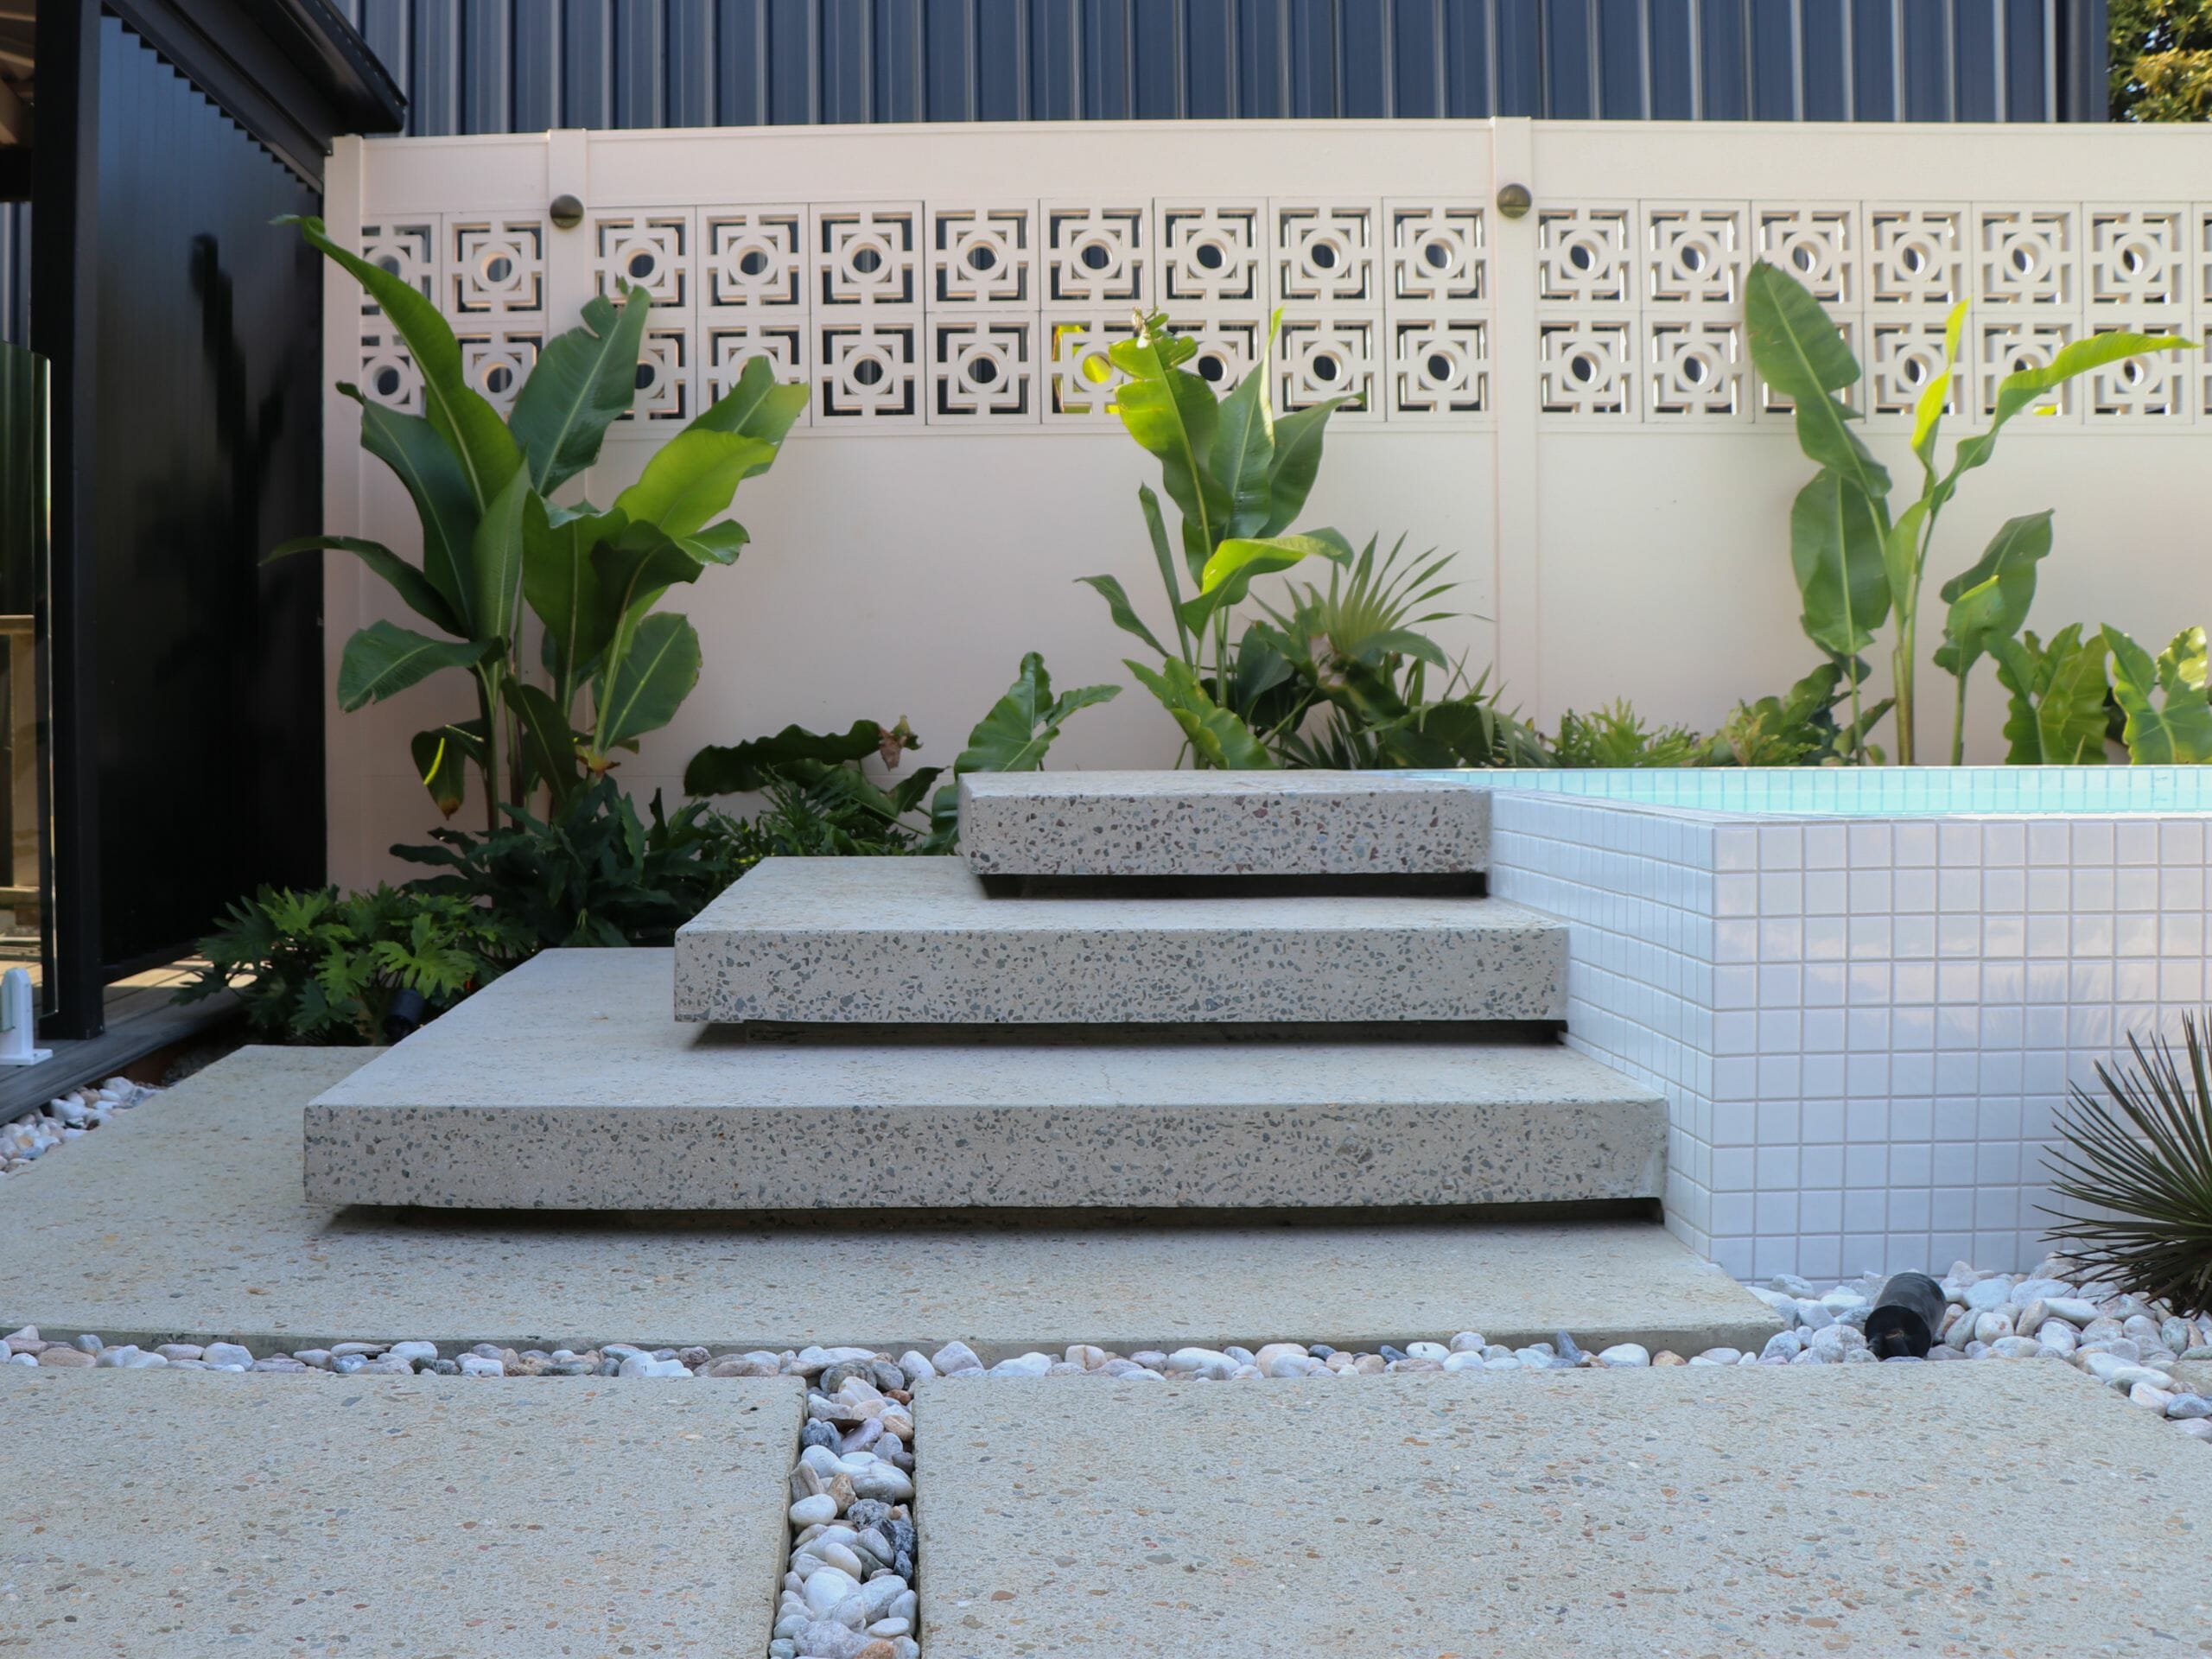 This image displays the inclusion of breeze blocks to provide a mid-century modern flair.